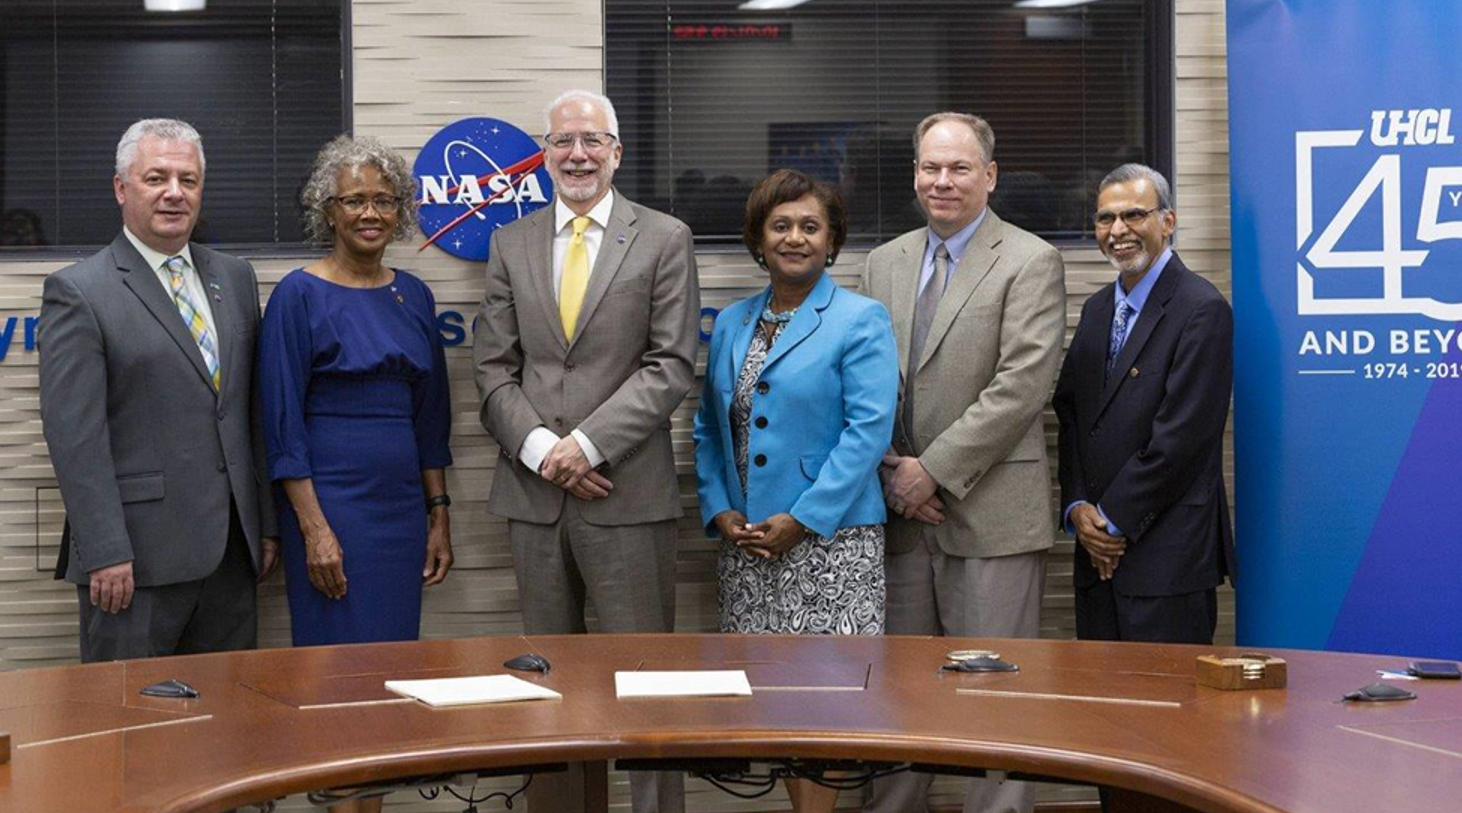 Lulla, far right, represents the University Partnership and Collaboration Office at a Space Act Agreement signing ceremony in 2019. Pictured, from left, are University of Houston-Clear Lake (UHCL) President Dr. Blake, UHCL Provost Dr. Berberich, JSC Director Mark Geyer, JSC Deputy Director Vanessa Wyche, and Exploration Integration and Science Director John McCullough. Credits: NASA 